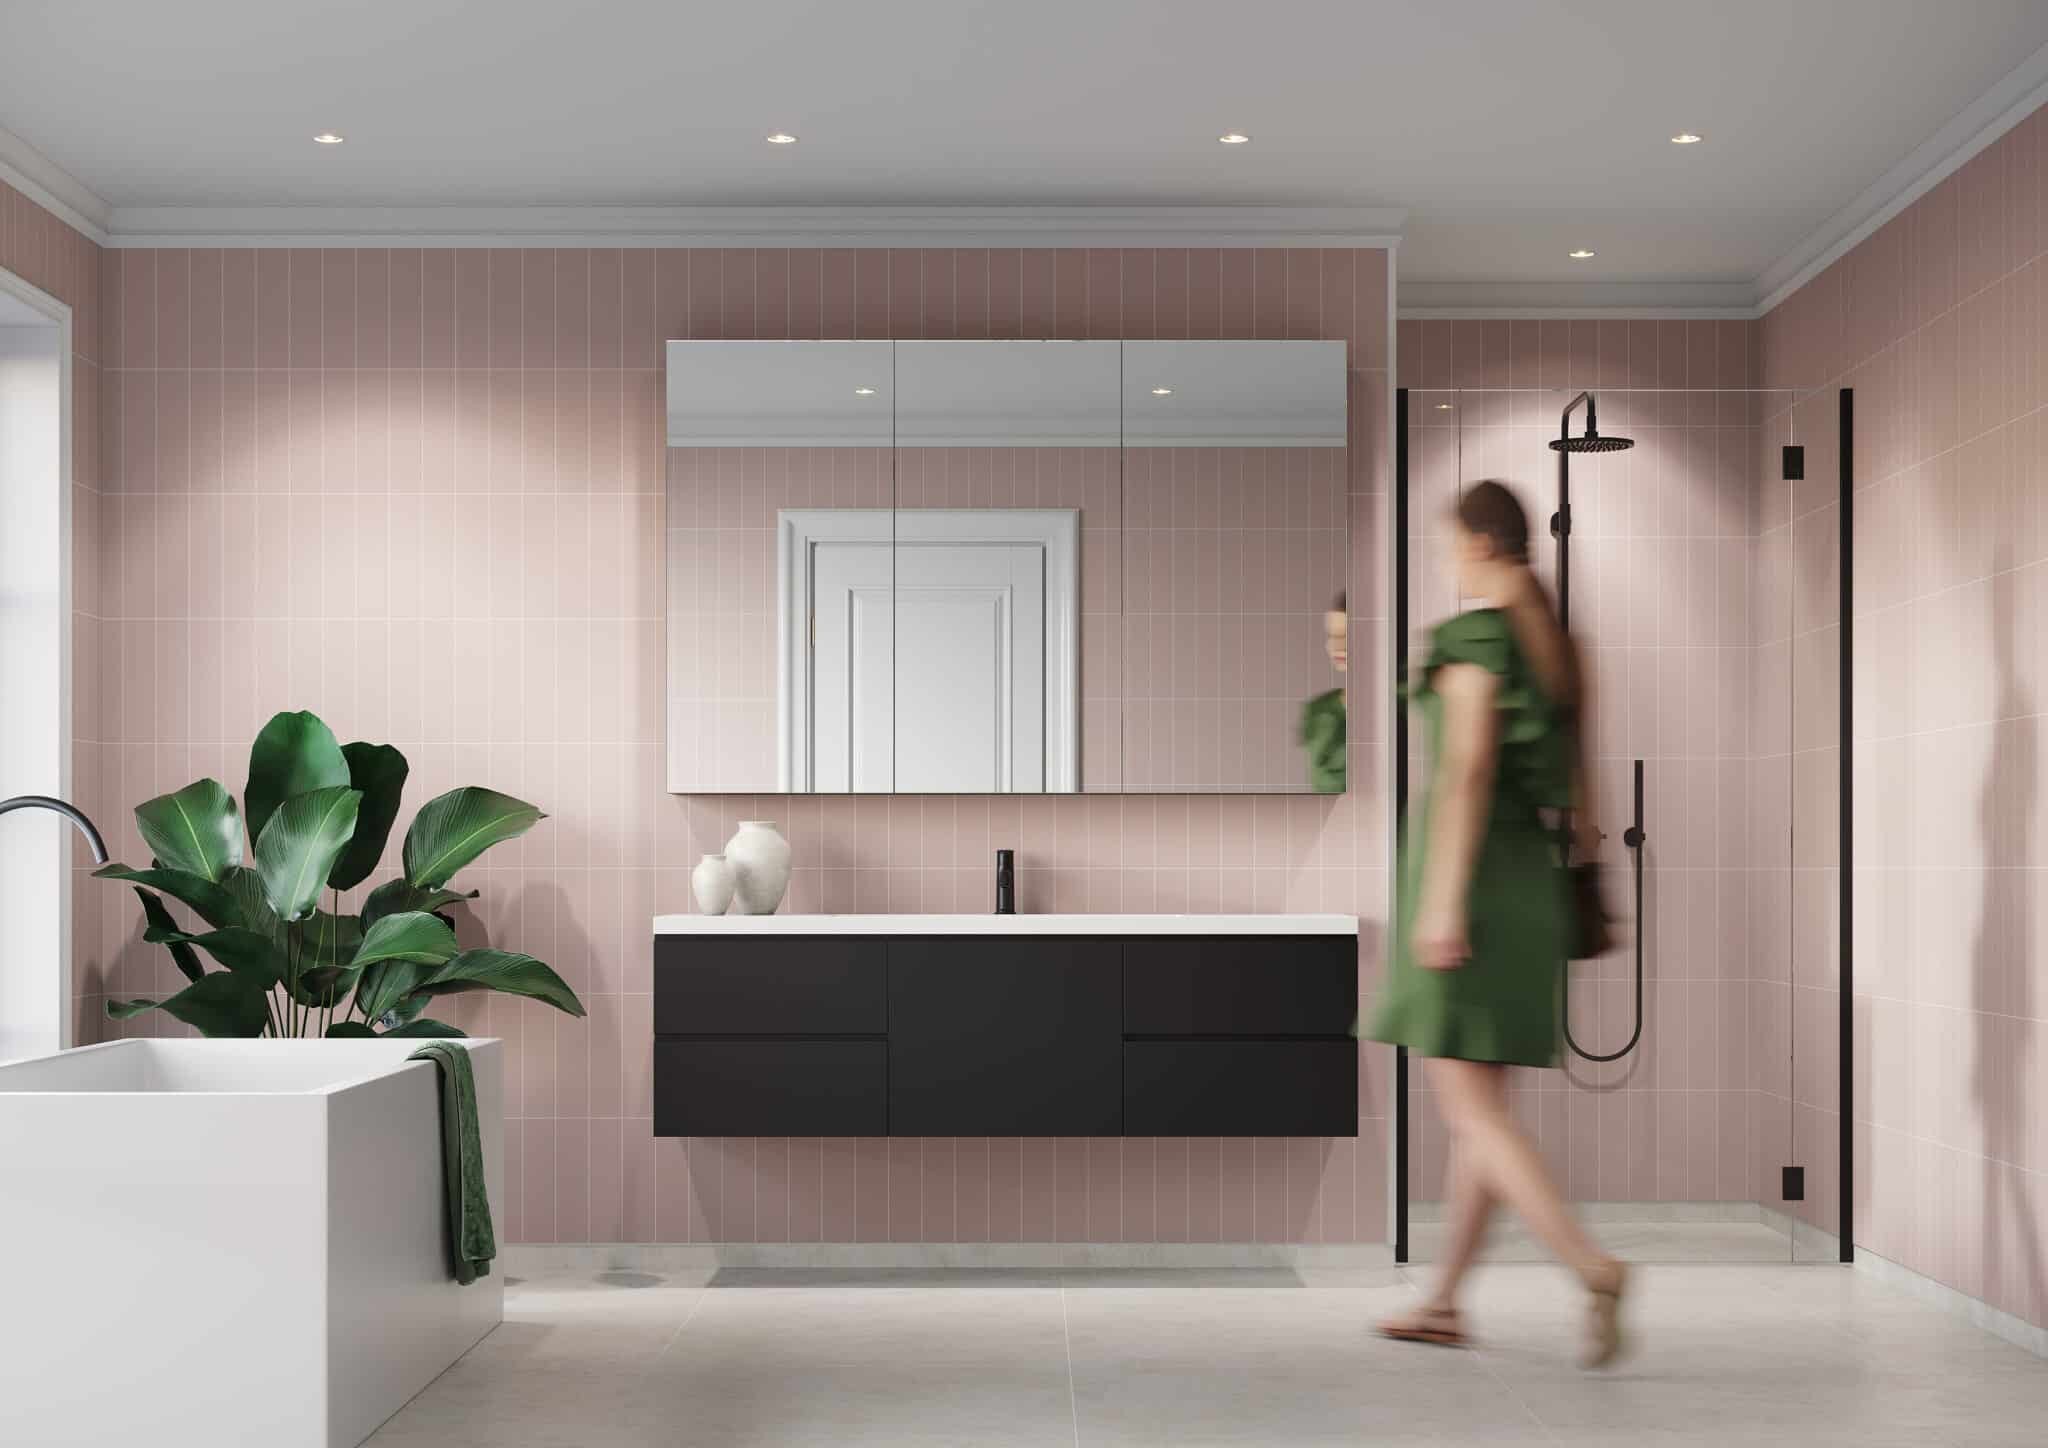 Fibo Urban Aqualock Wall Panel with Stacked Subway Tile 2400 x 600mm Dusky Pink [T5218-M0830]